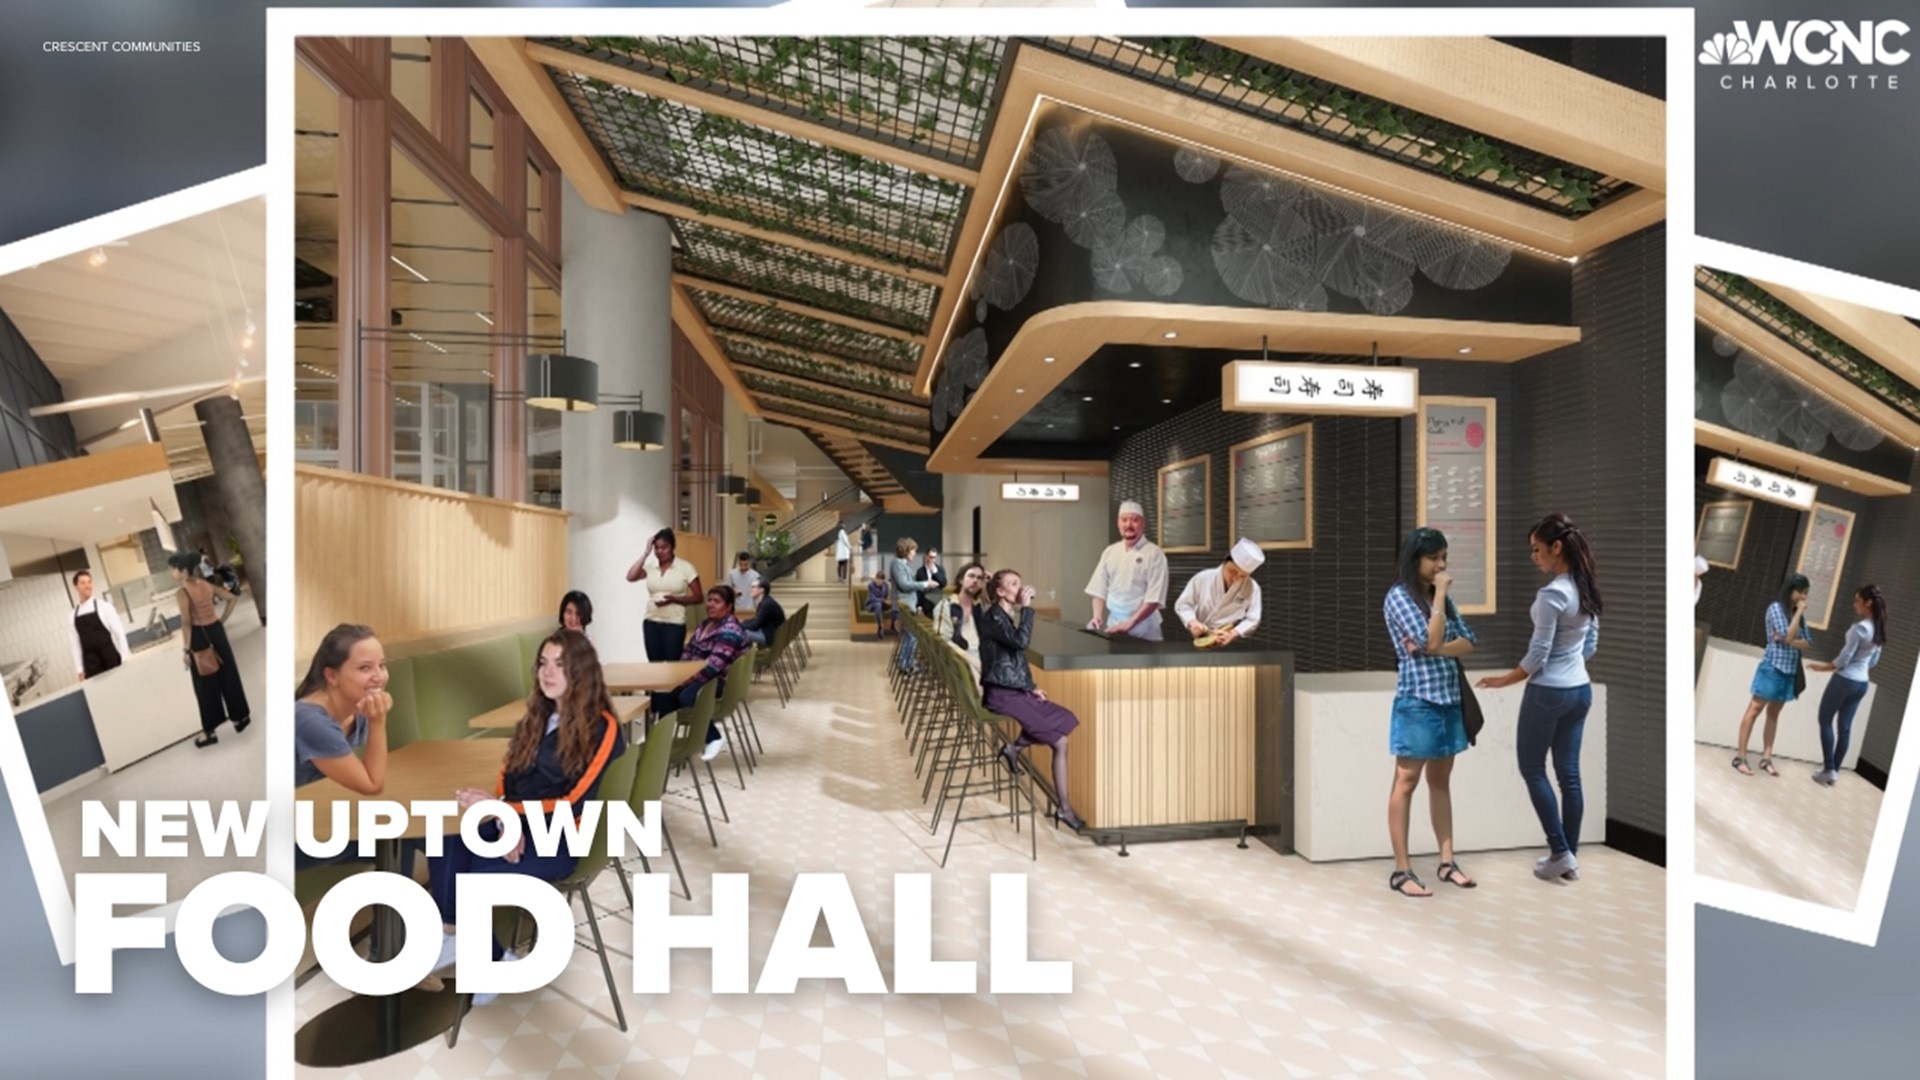 A new food hall will open at the corner of Trade and Tryon by the end of the year.